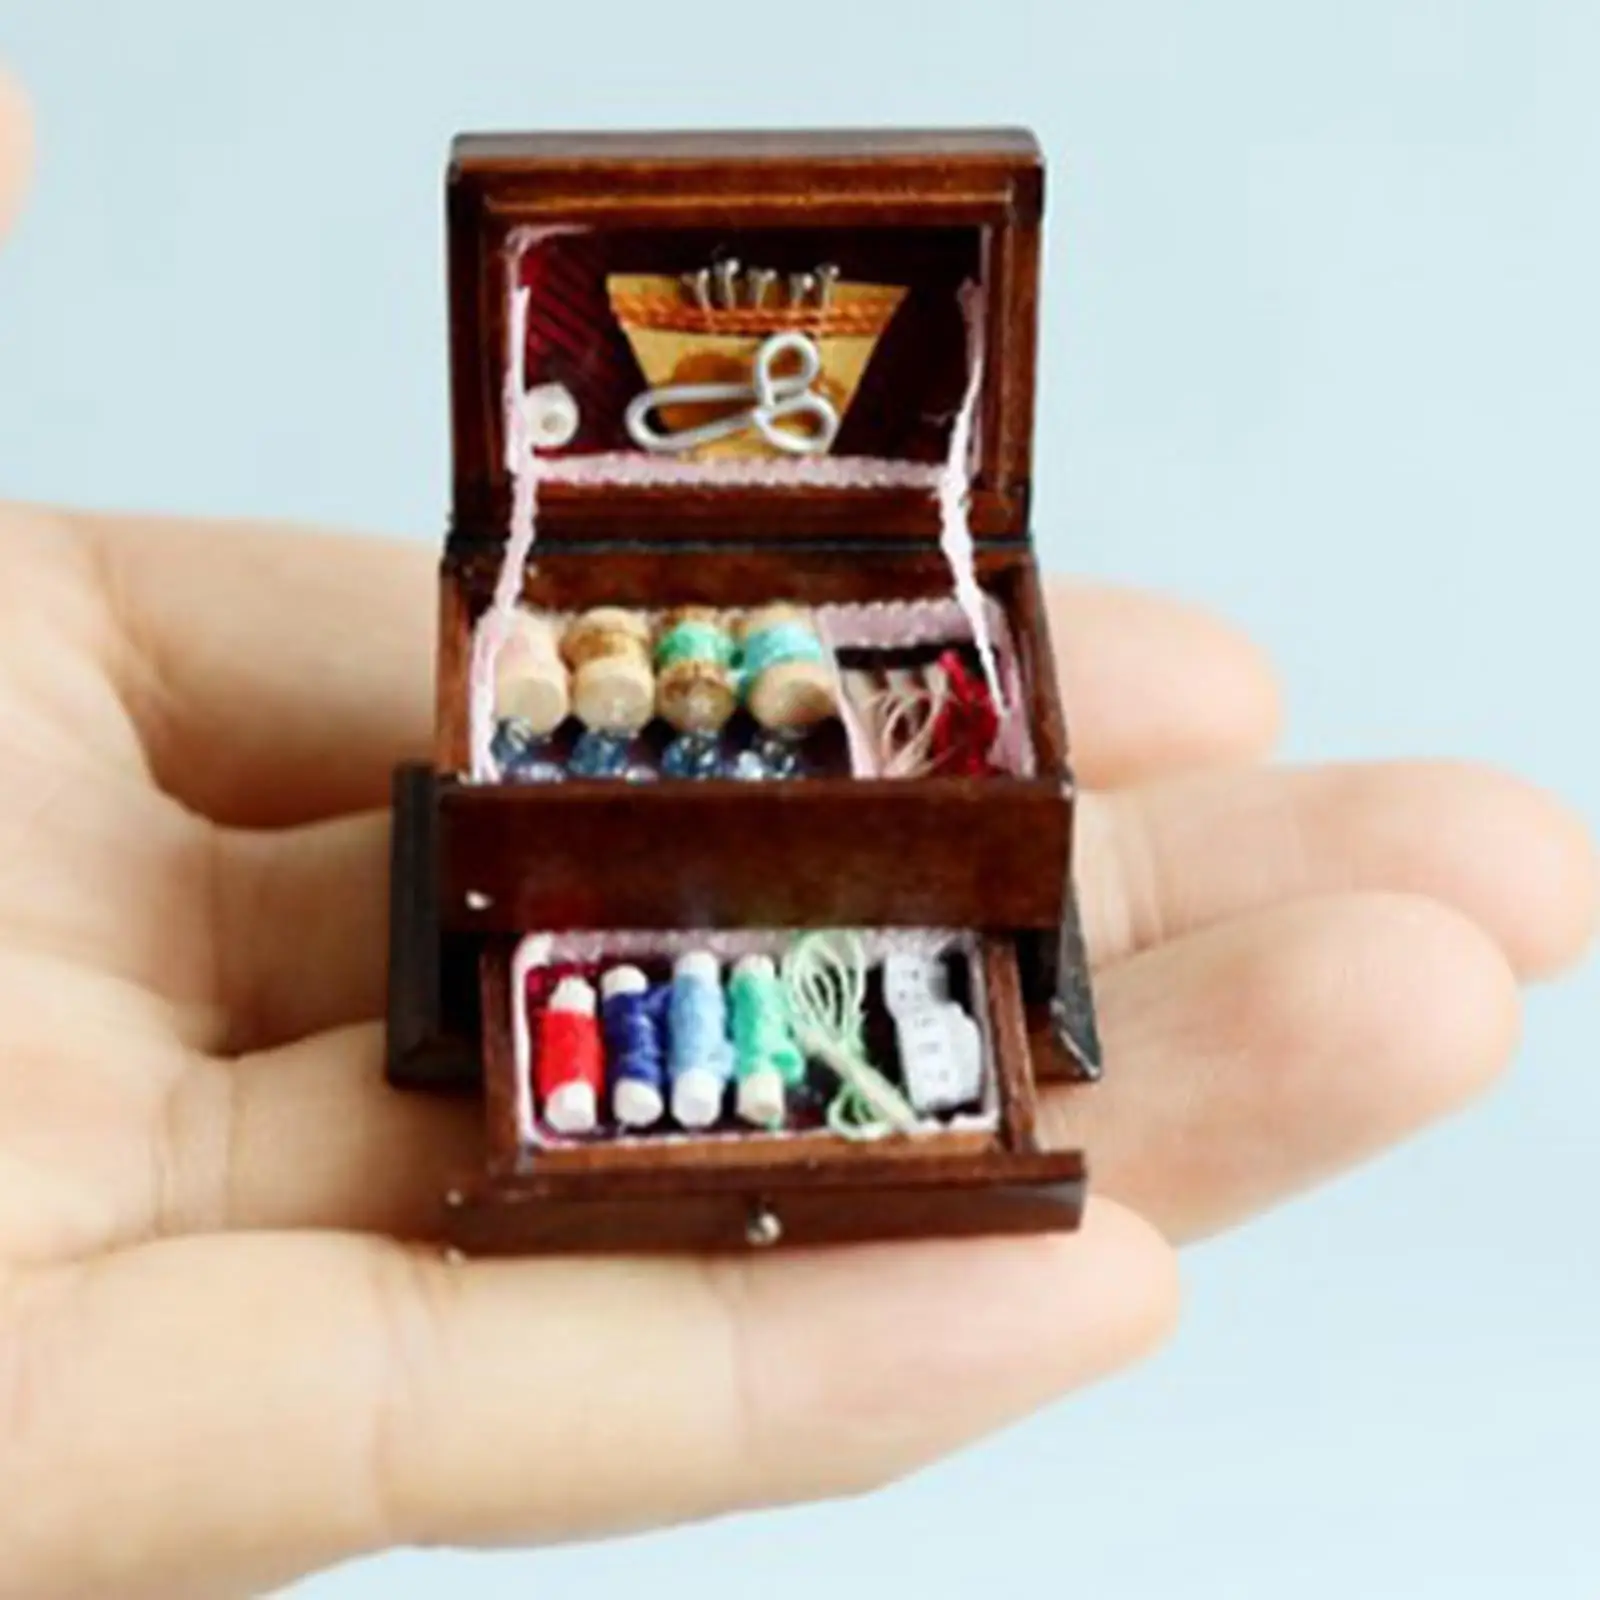 1/12 Furniture Life Scene Model Toy Scenery Supplies Decor Accessories Dollhouse Sewing Needlework Box Crafts Simulation